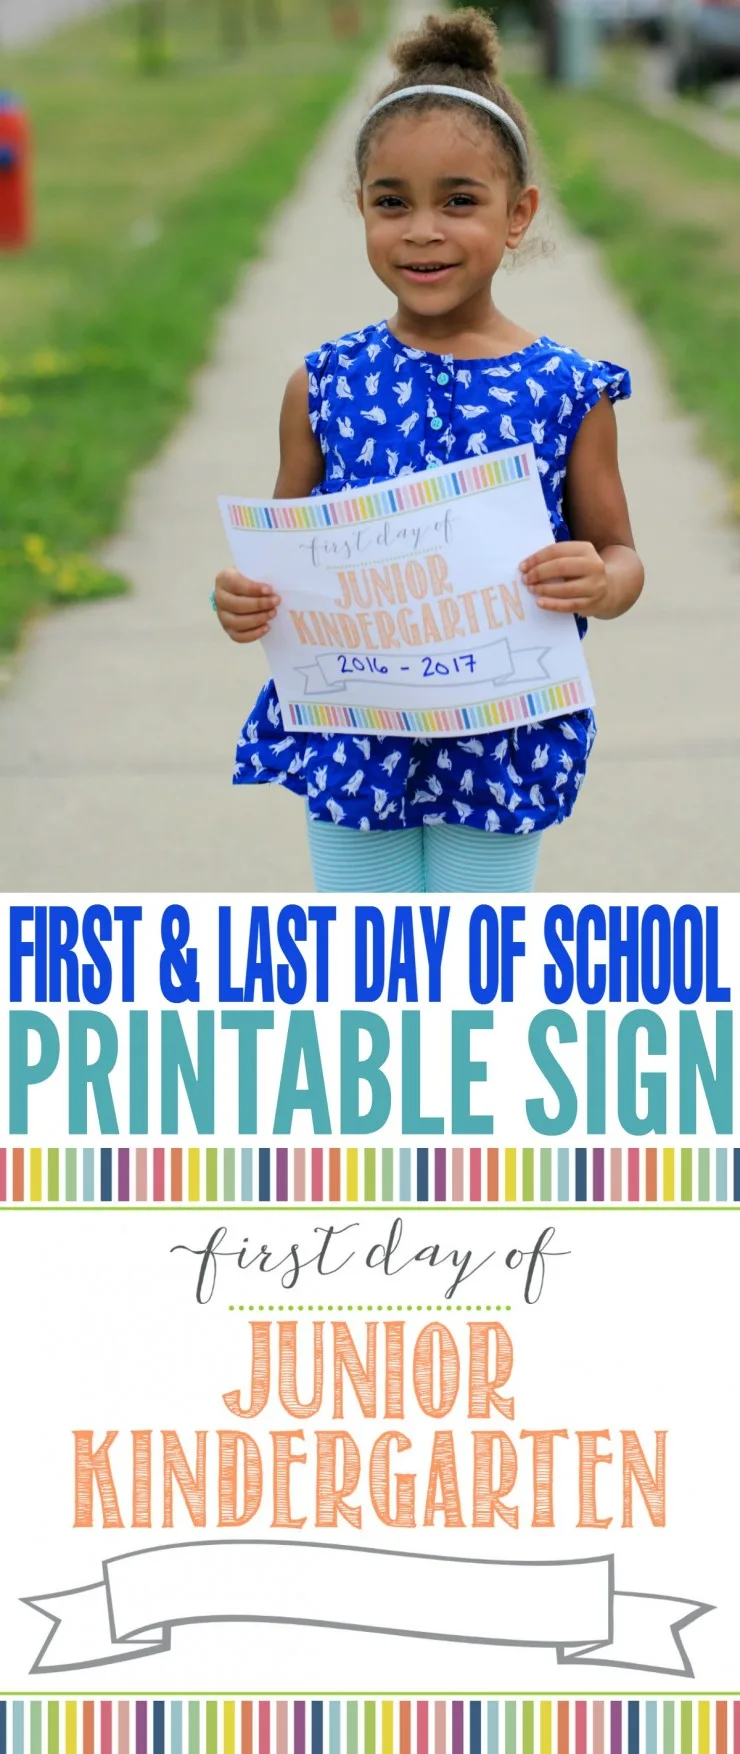 Commemorate back to school with the help of these free first day of school printable signs. These are free printable signs to use on the First Day of school for all grade levels from preschool through to grade 12.